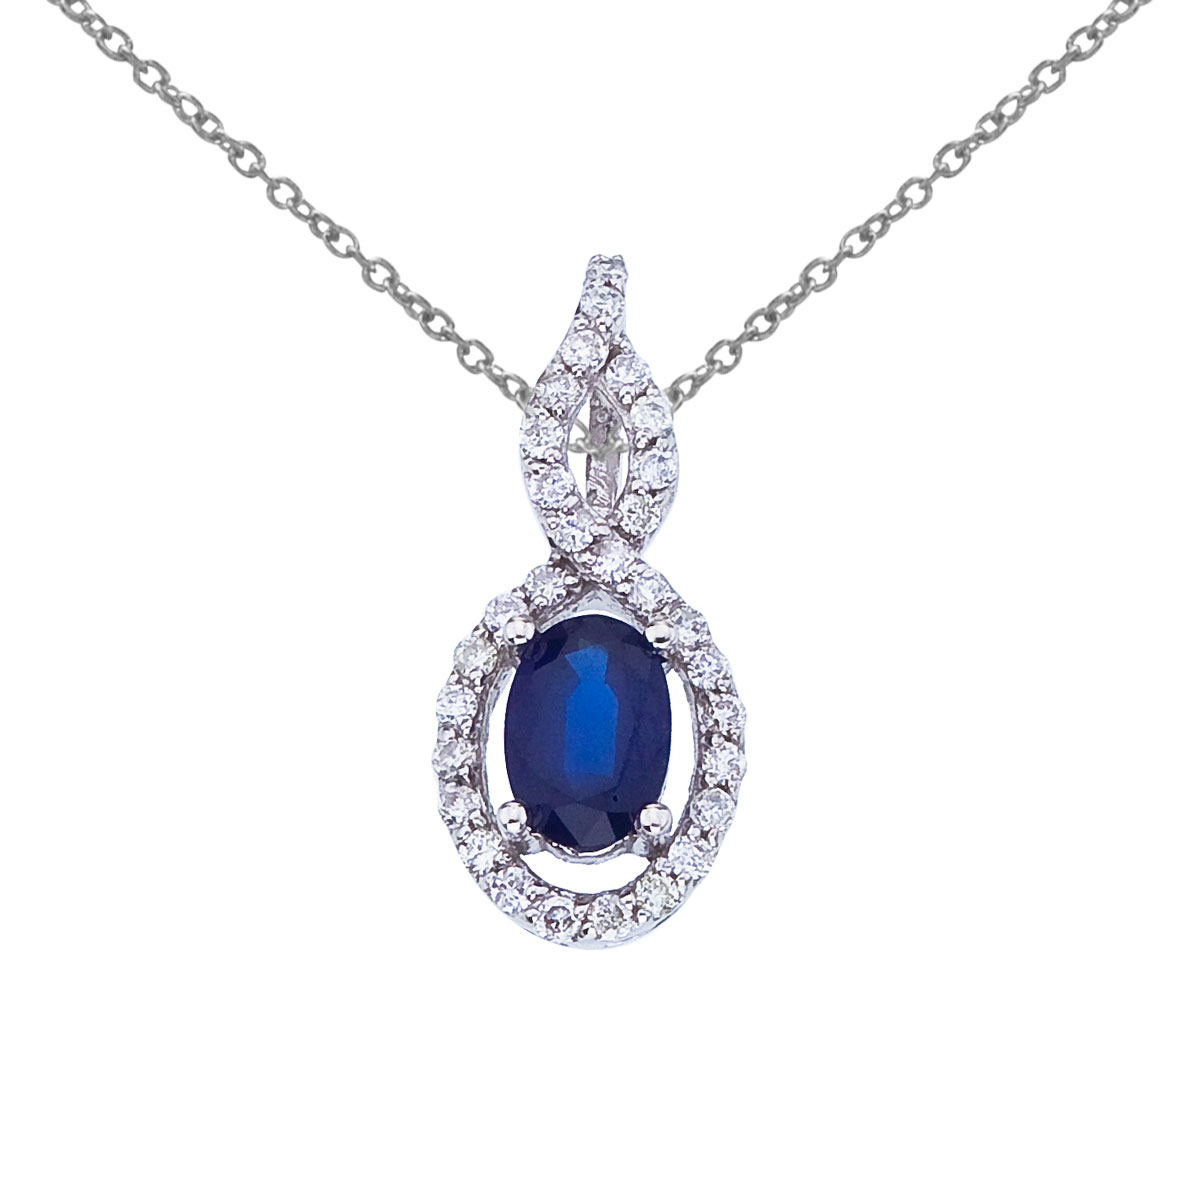 JCX2580: Luminous 6x4 mm sapphire pendant surrounded by .18 total ct diamonds set in 14k white gold.